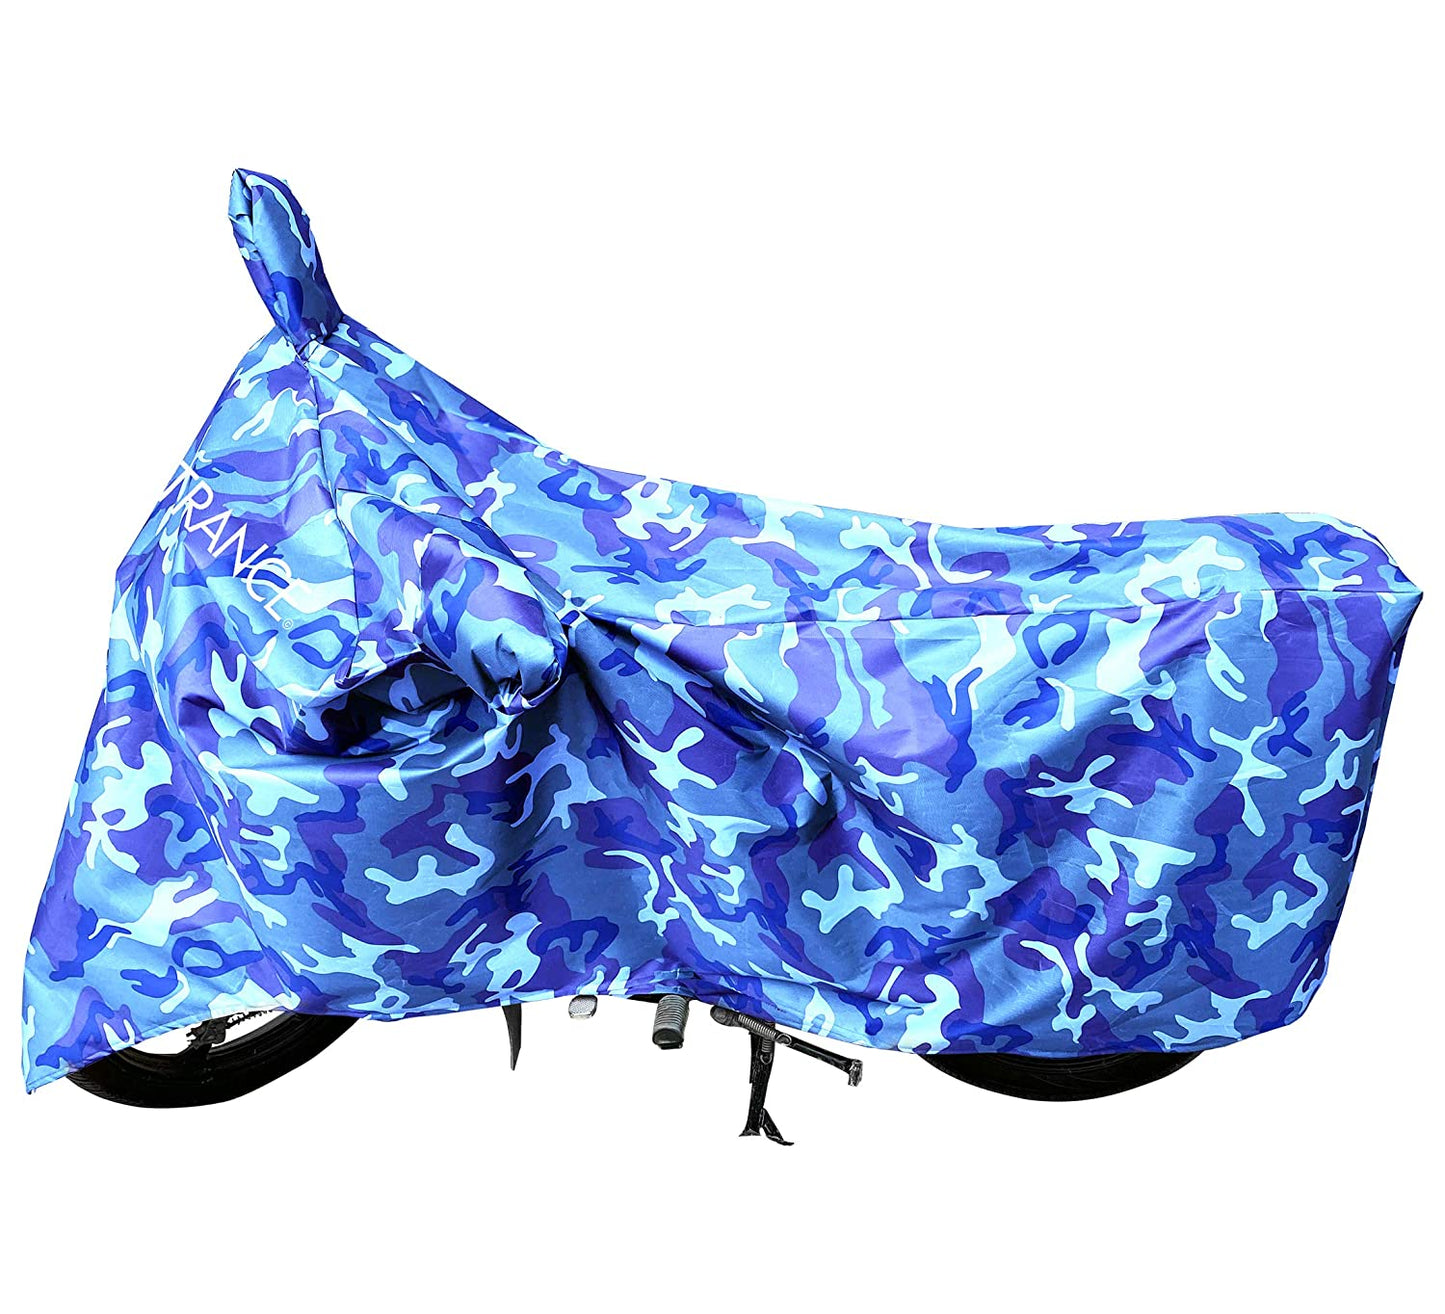 MotoTrance Jungle Bike Body Covers For Hero Karizma - Interlock-Stitched Waterproof and Heat Resistant with Mirror Pockets